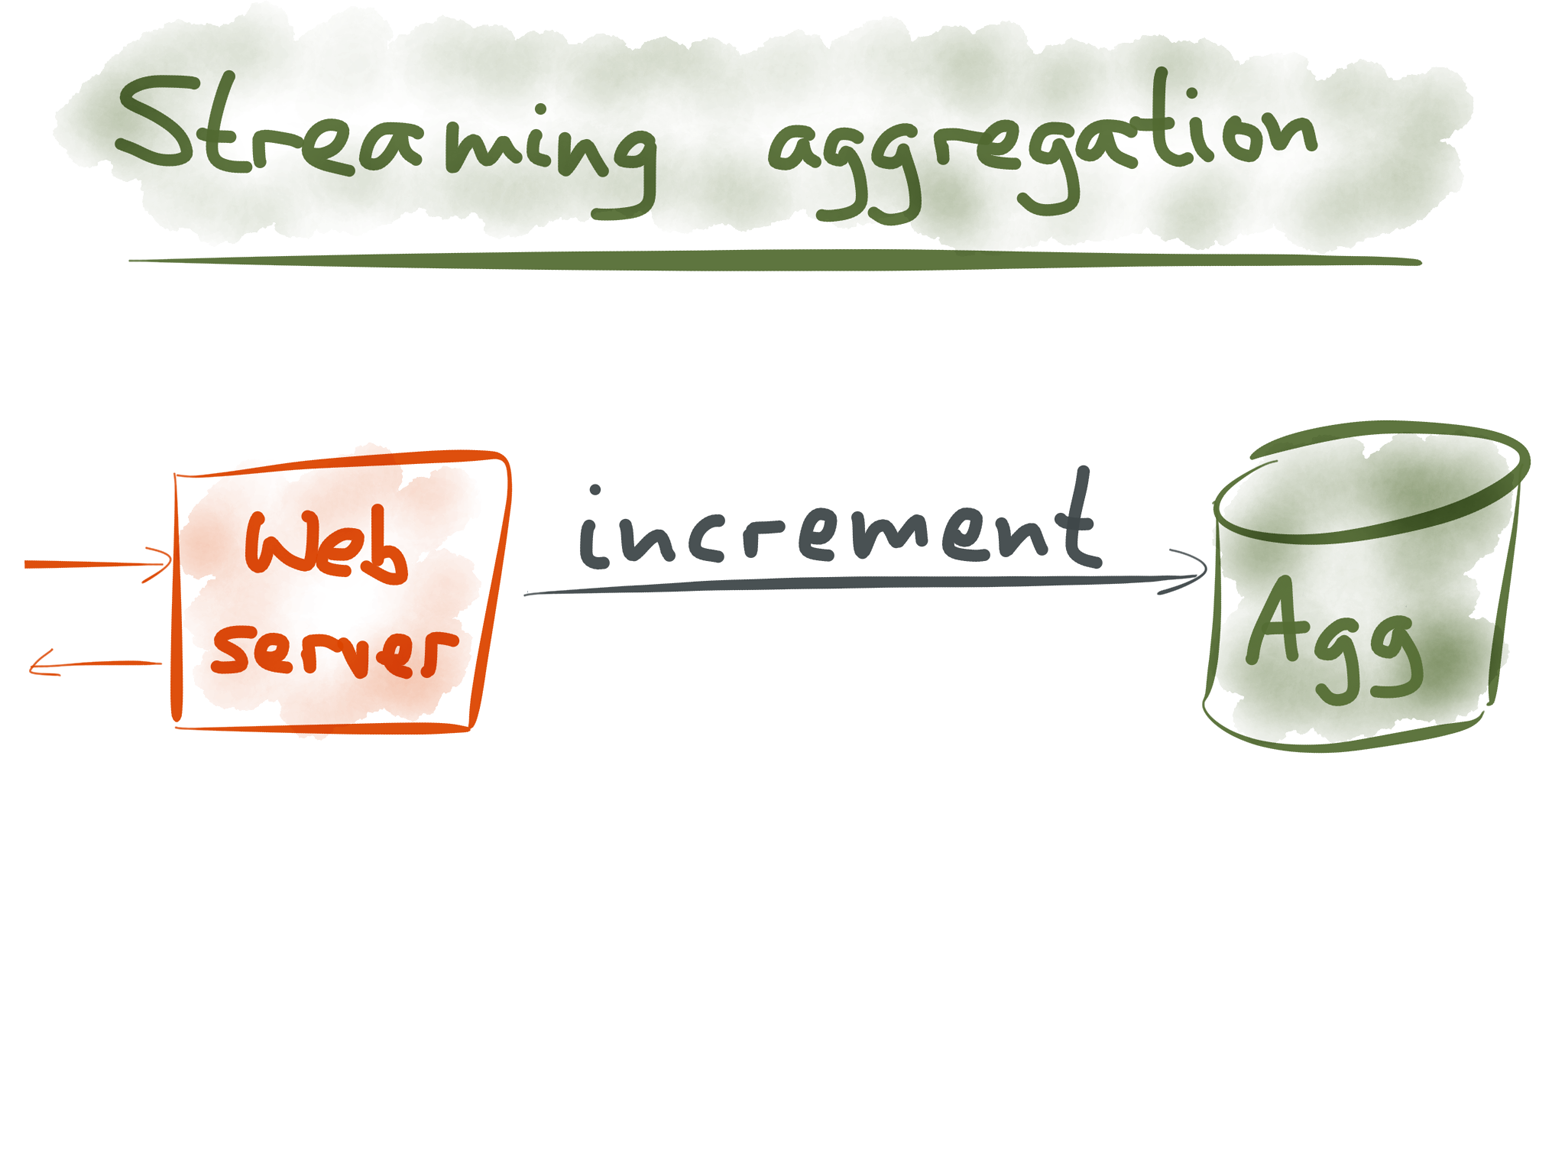 The simplest implementation of streaming aggregation.